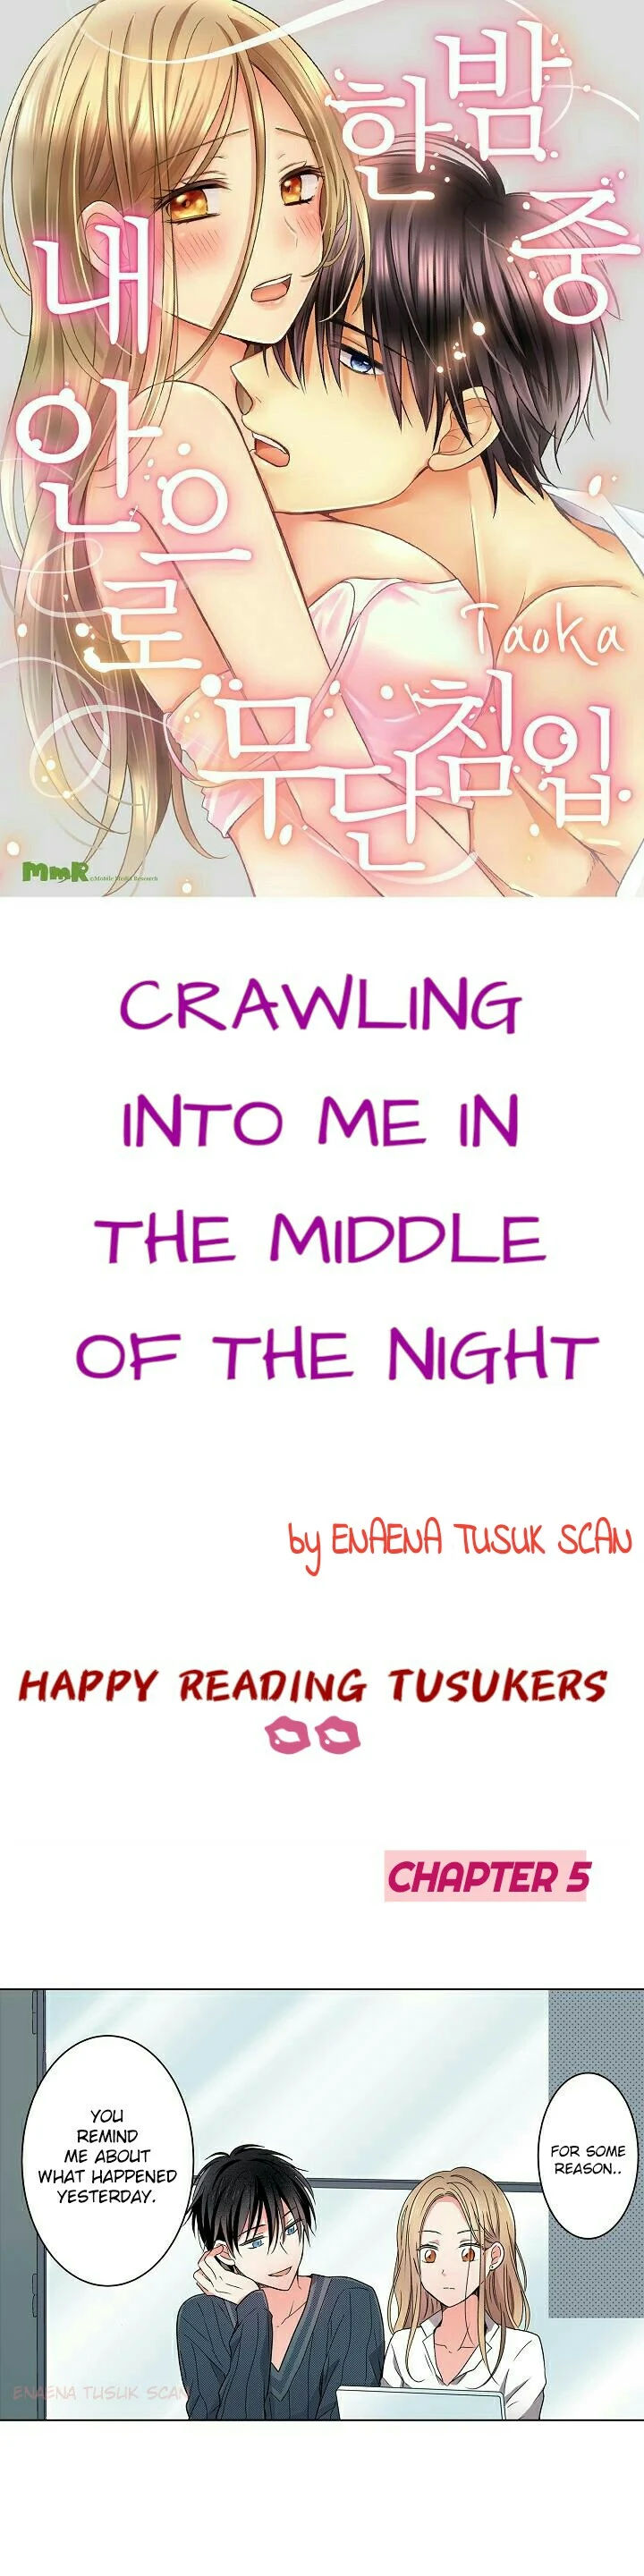 Crawling Into Me in the Middle of the Night - Chapter 5 Page 1